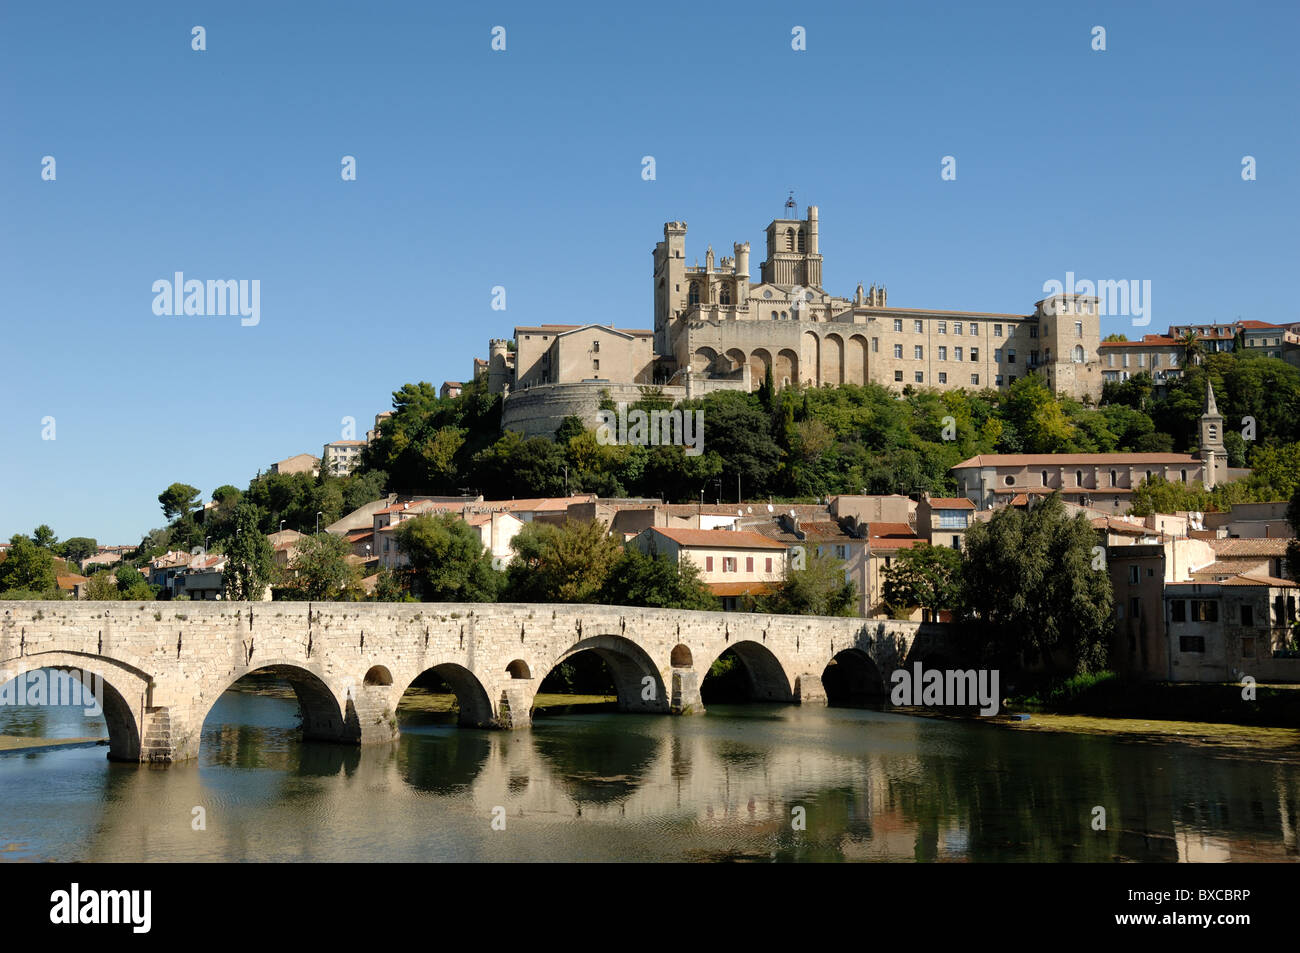 View & Skyline of Beziers Old Town with Saint Nazaire Cathedral & Medieval Stone Bridge over River Orb, Herault, France Stock Photo